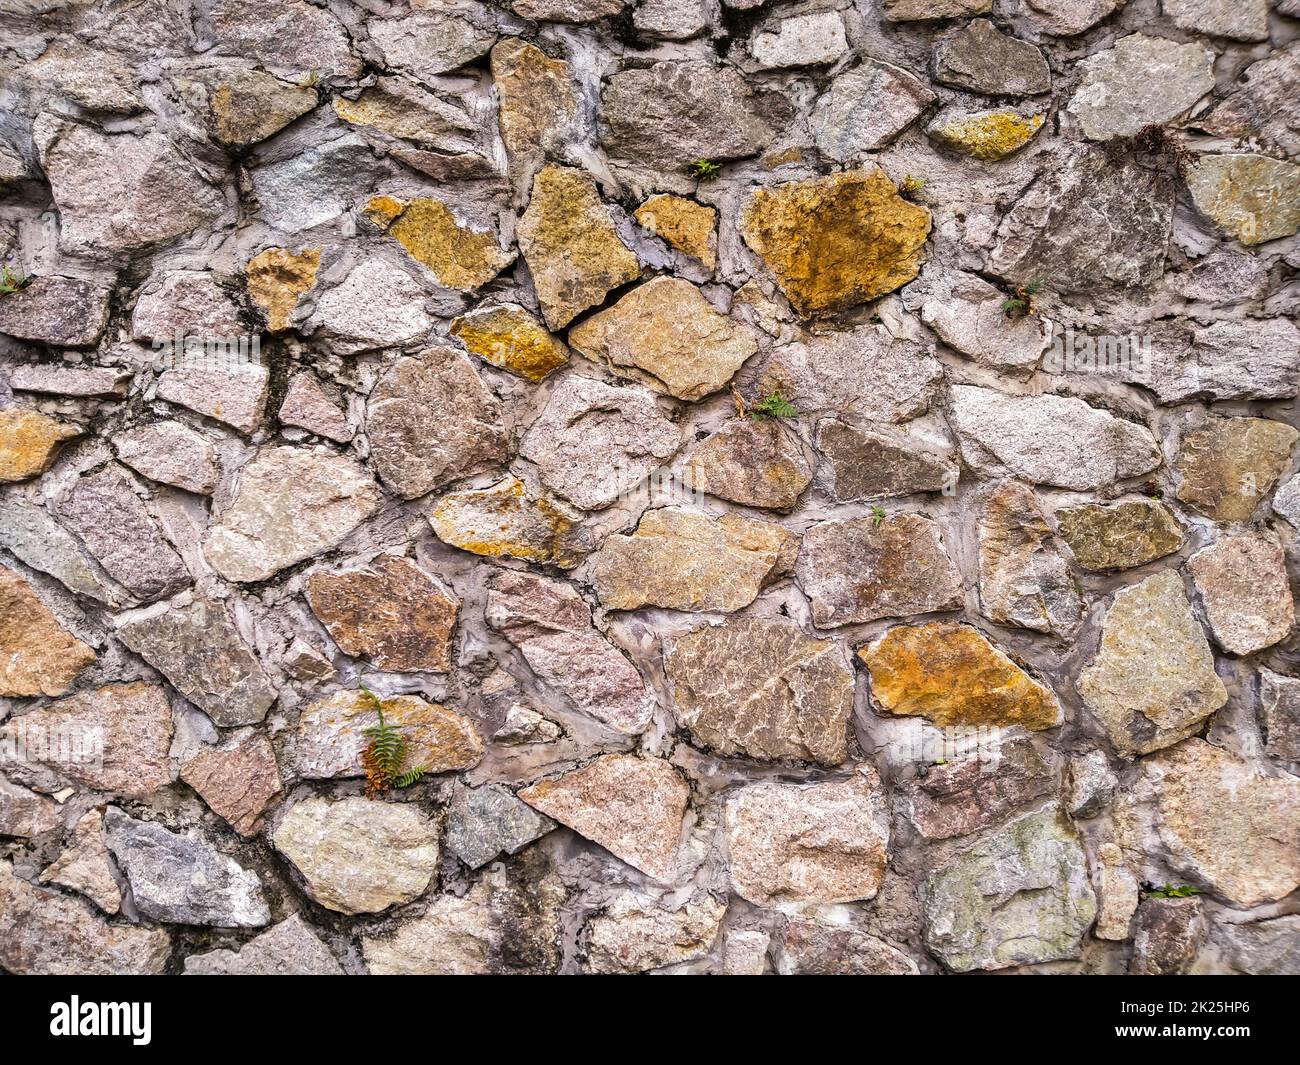 Slate stone wall textured background. Stone backgrounds textured pattern abstract image Stock Photo